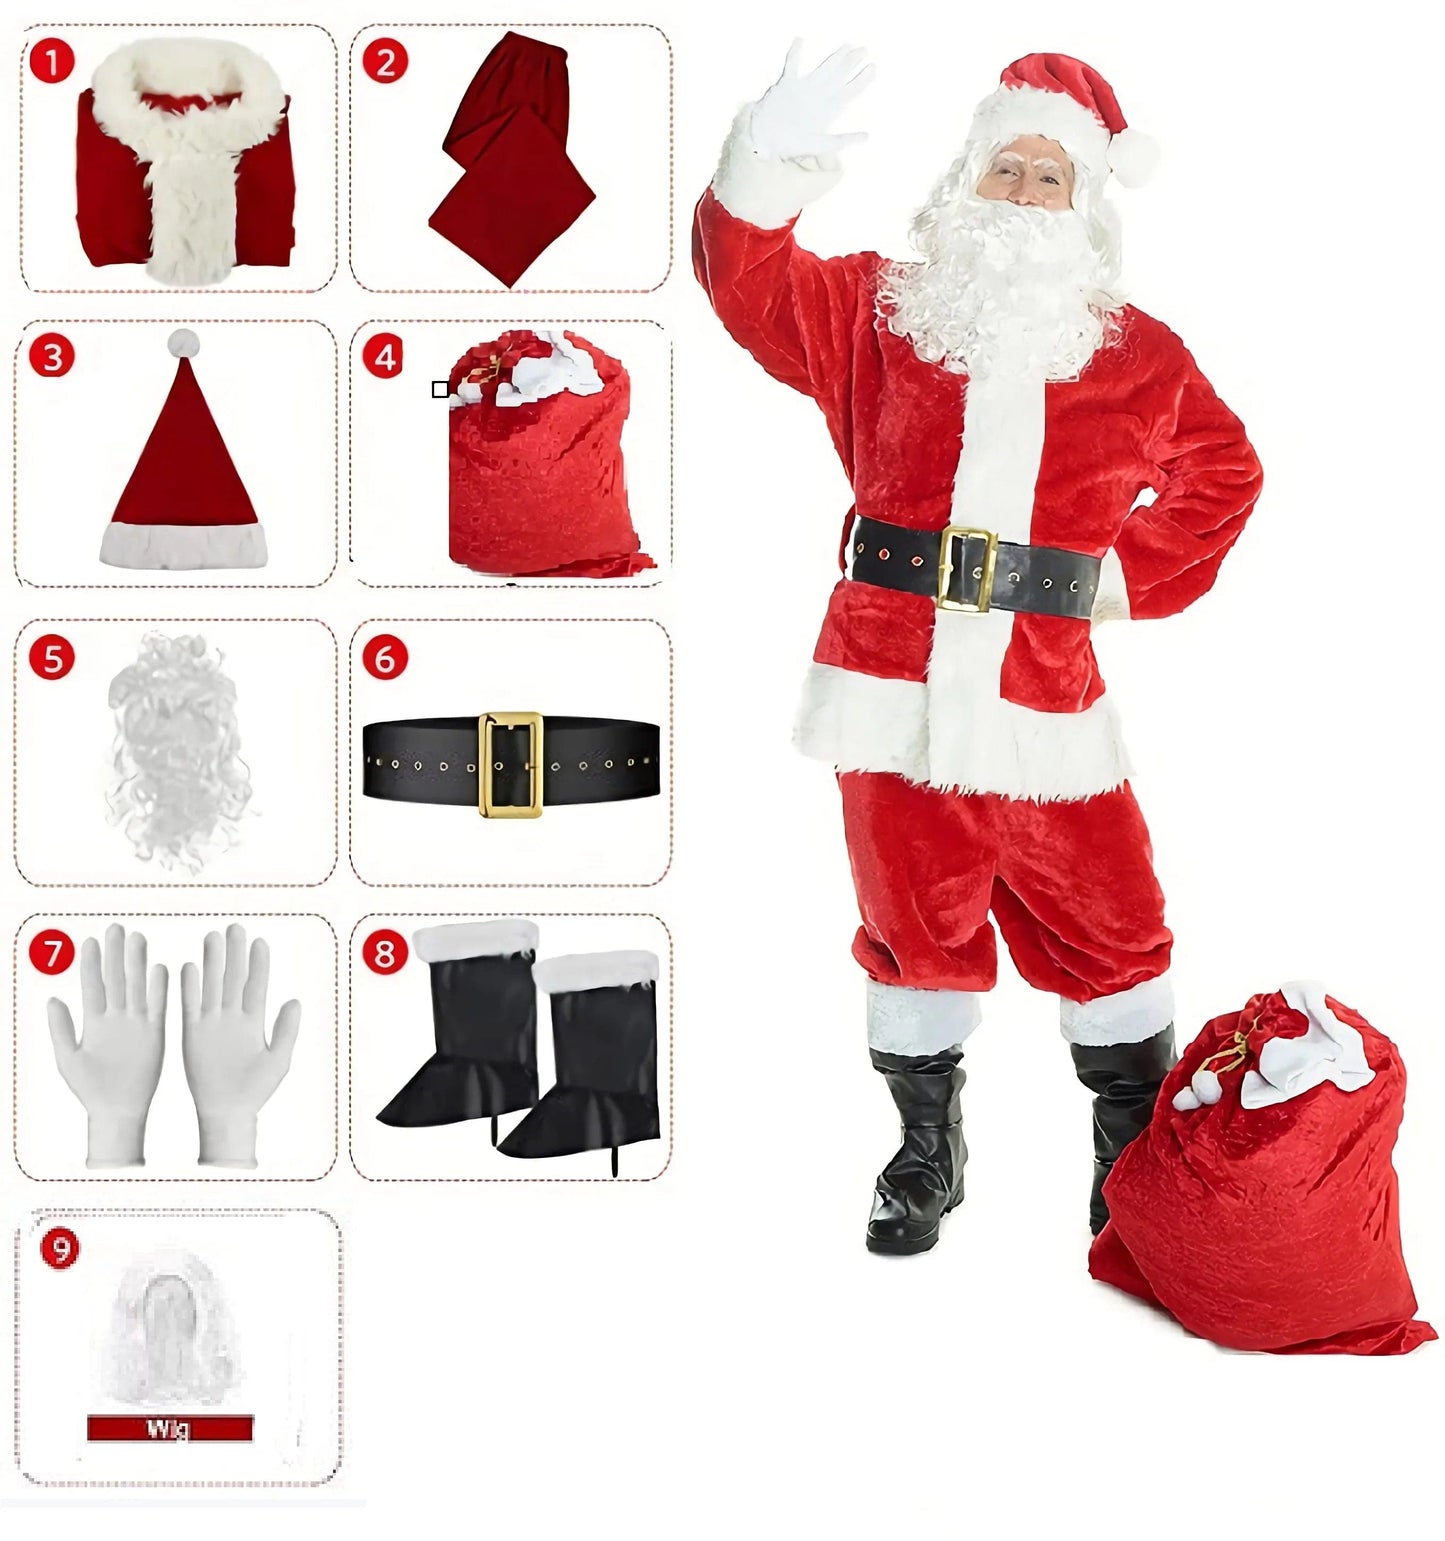 Red Deluxe velvet 9-piece Christmas Party Men Children Family Costume Santa Claus Costume Adult Christmas cosplay costume